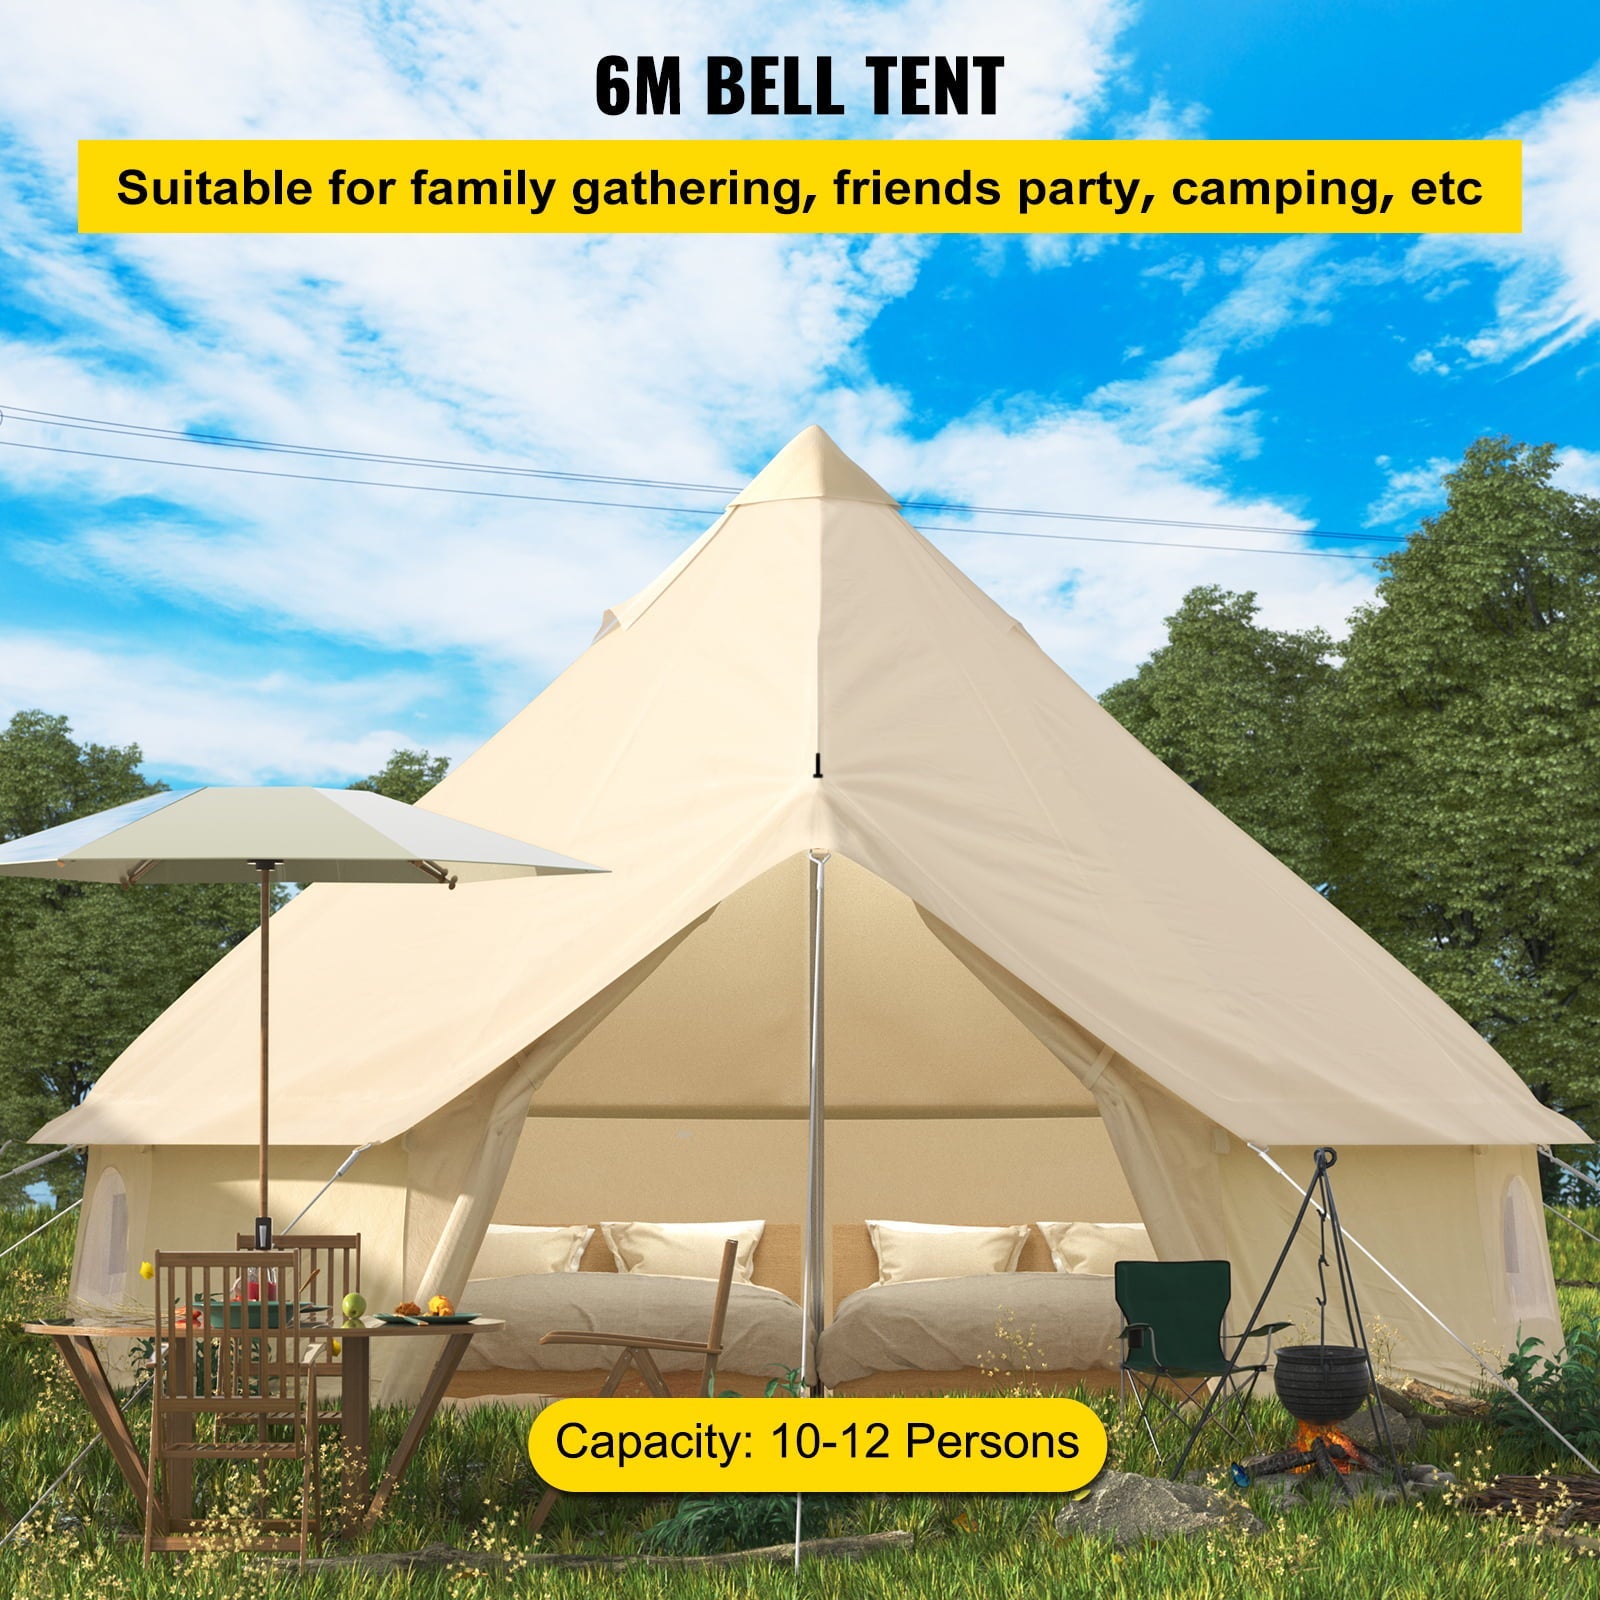 VEVORbrand Canvas Bell Tent 19.7ft Cotton Canvas Tent with Wall Stove Jacket Glamping Tent Waterproof Bell Tent for Family Camping Outdoor Hunting in 4 Seasons